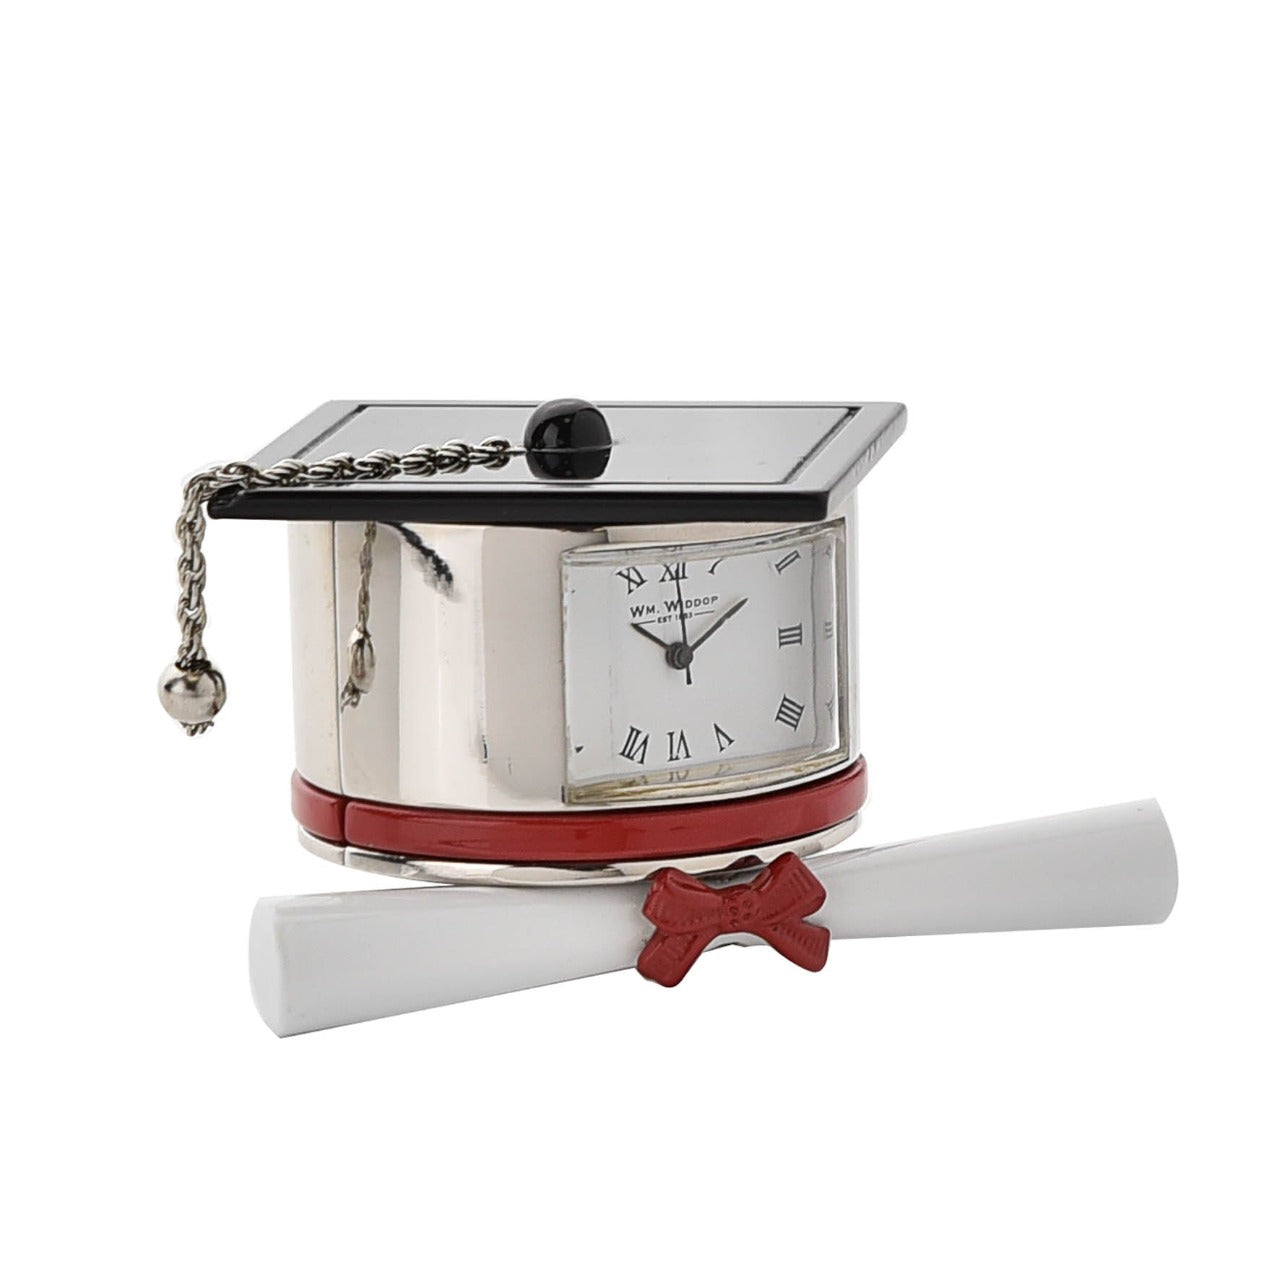 Miniature Clock Graduation Hat & Scroll  A graduation hat and scroll miniature clock from WILLIAM WIDDOP®.  Bring a unique and quirky touch to the home with this stylish miniature clock made with great attention to detail.